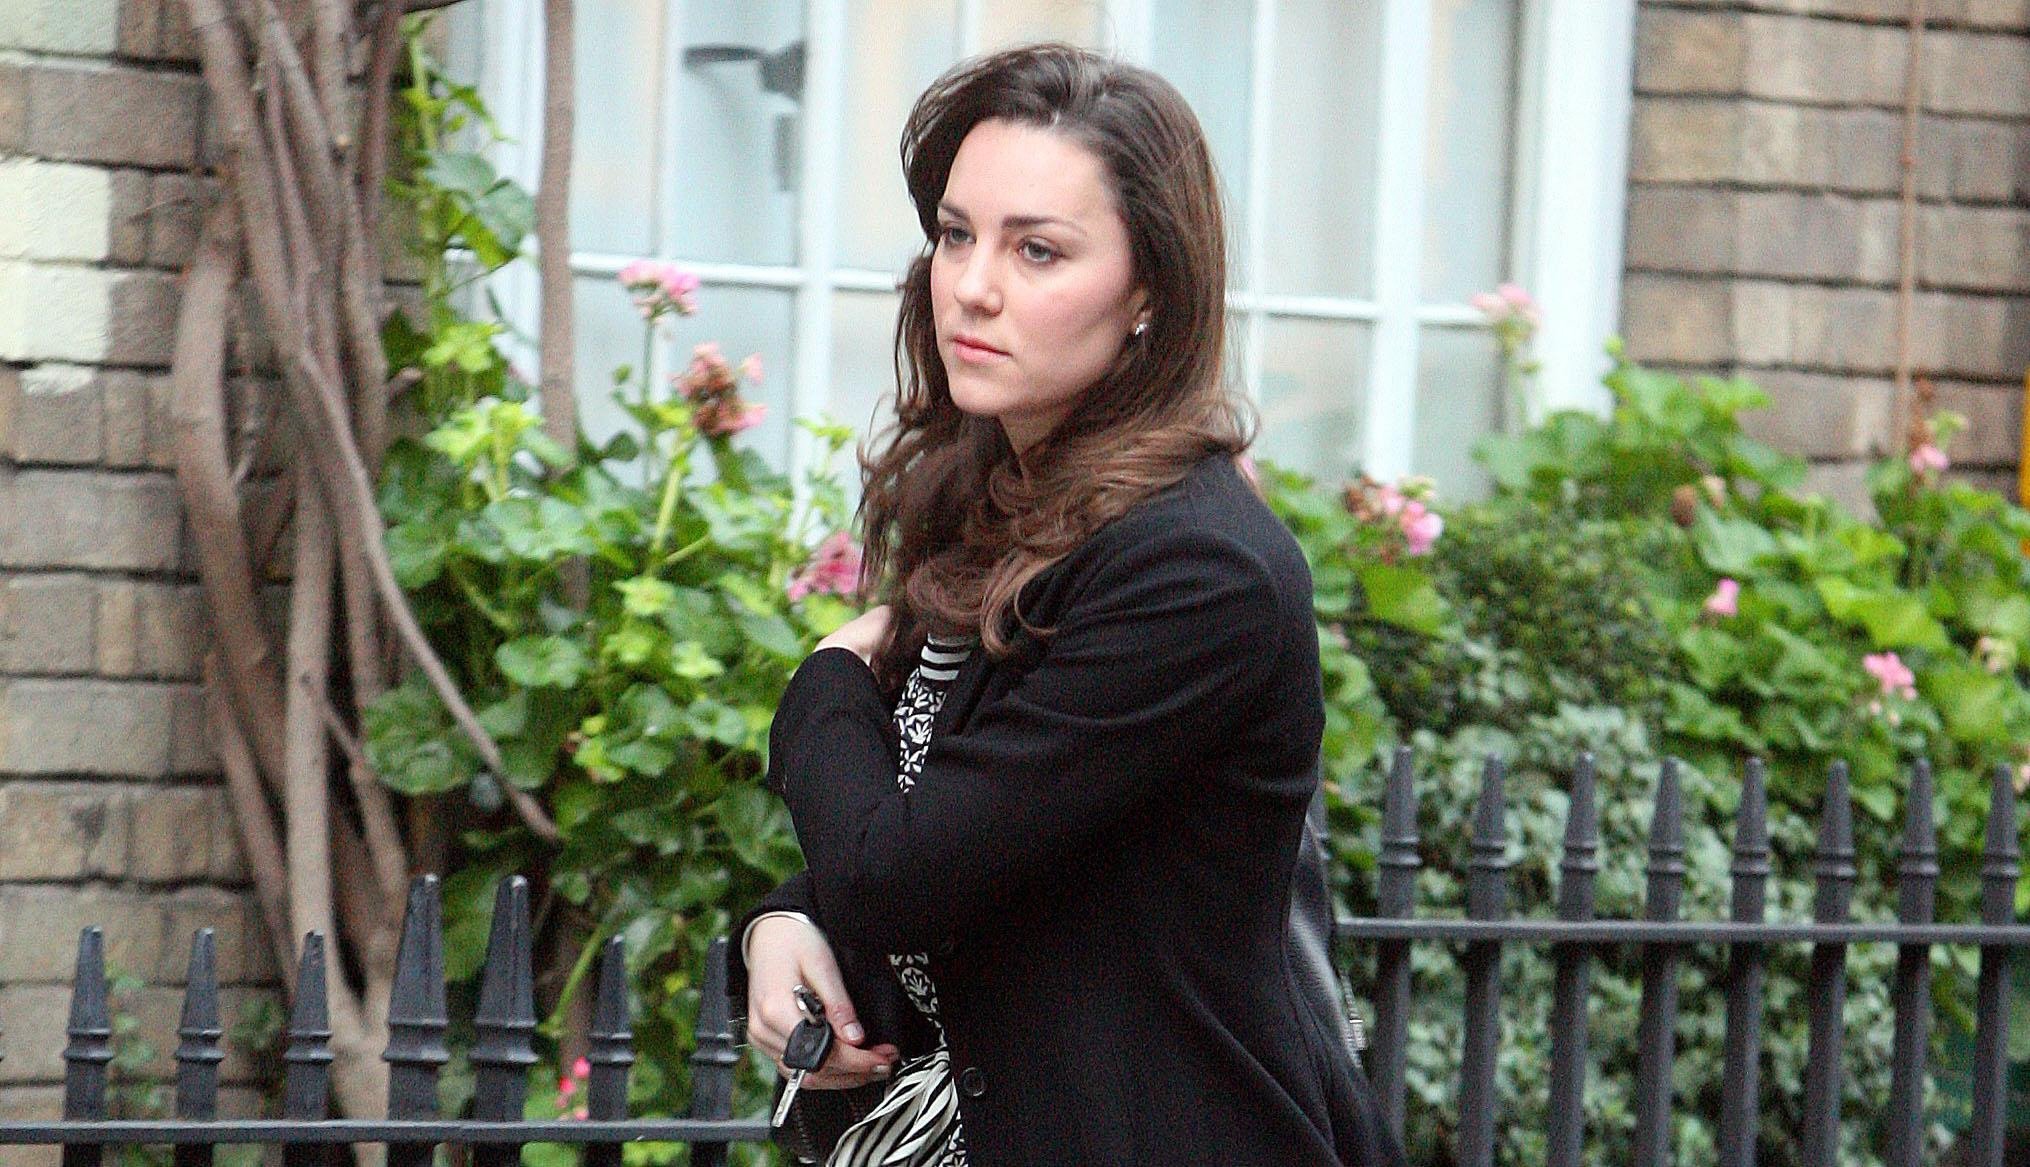 Kate Middleton spotted outside her house on her 25th birthday in London. / Source: Getty Images